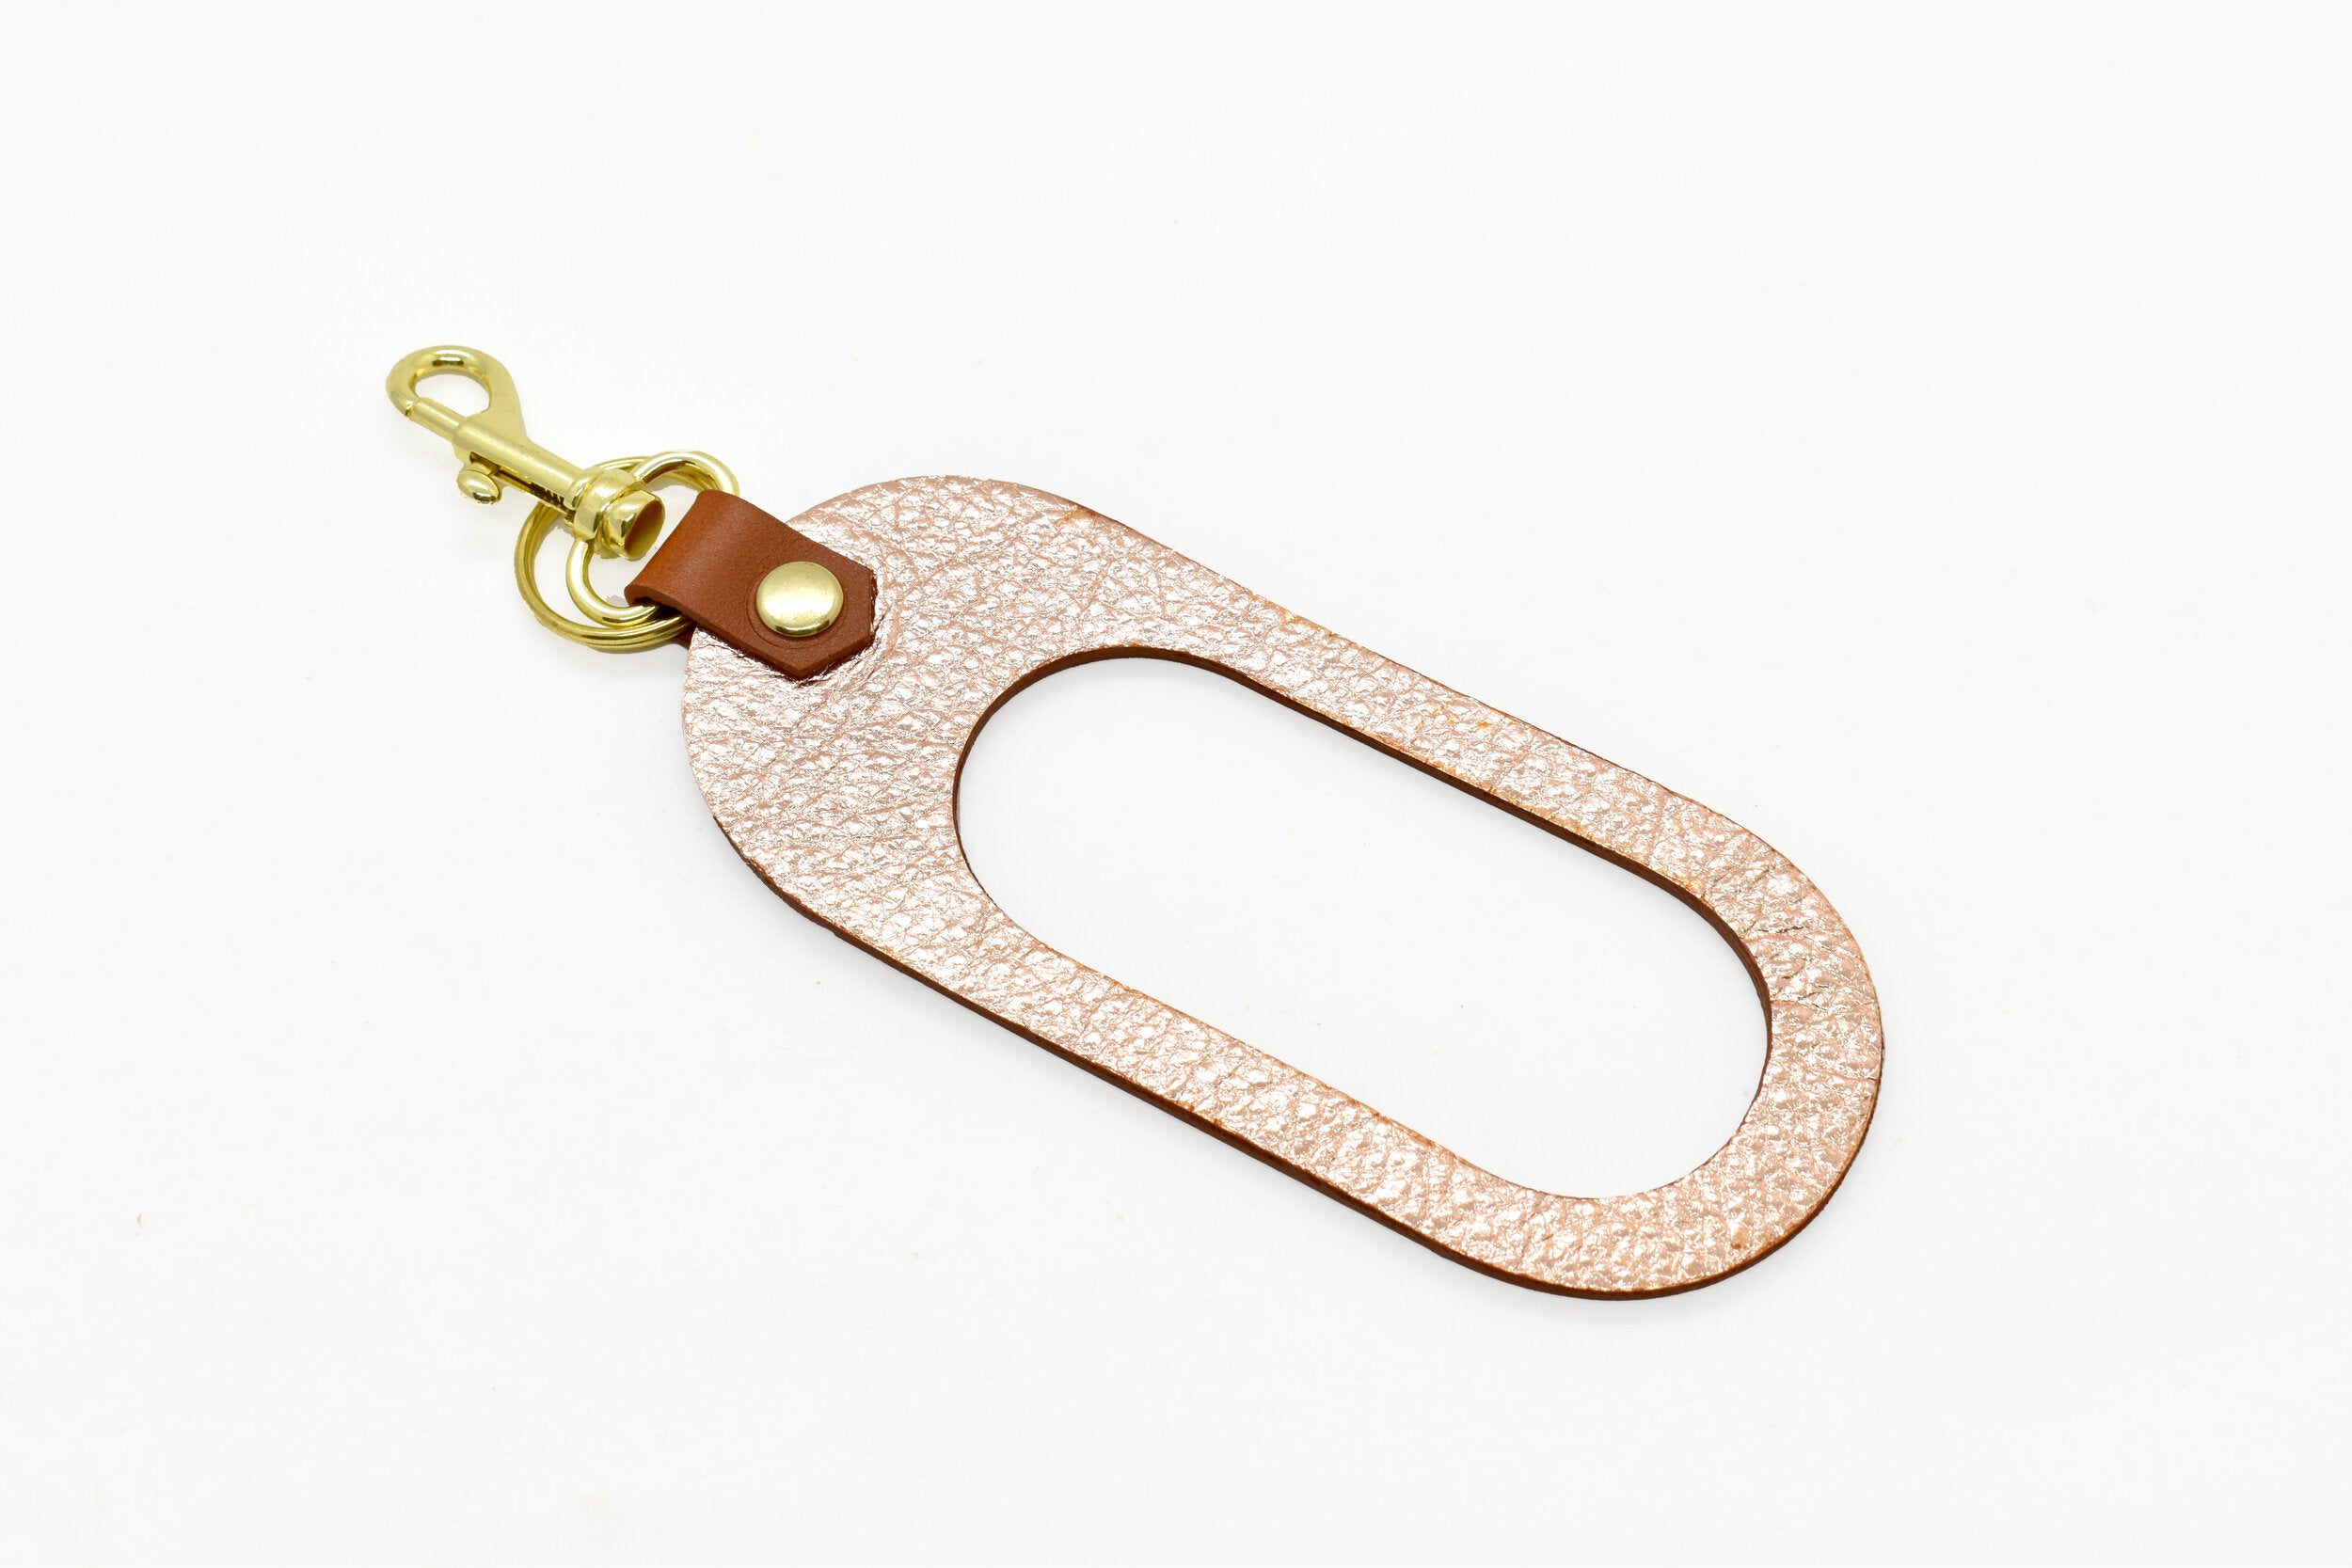 dual colored leather cut out key chain hand strap with gold keyring and spring clasp metallic rose and light brown